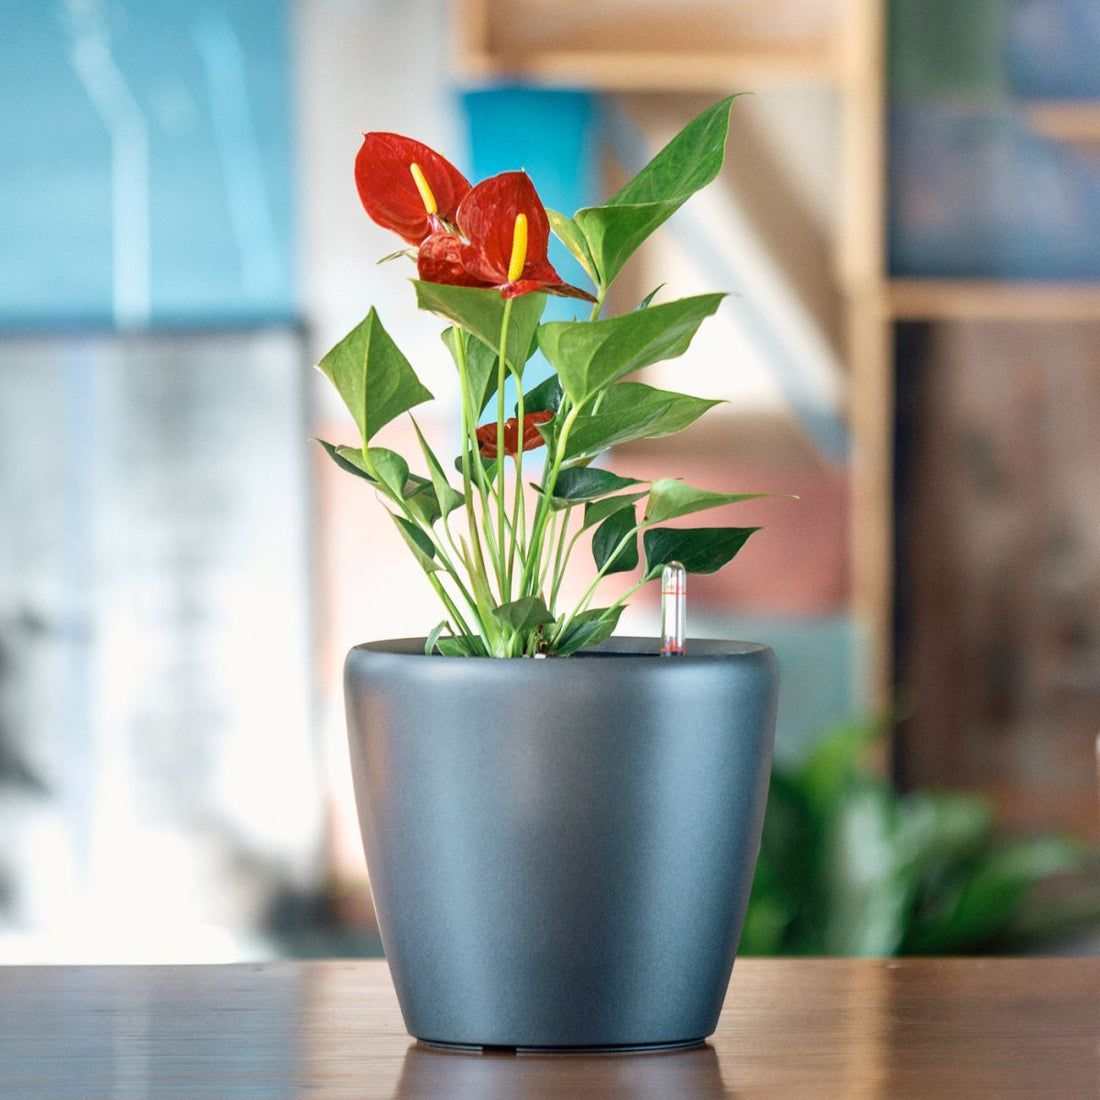 Anthurium Potted In Lechuza Classico Mini Planter - Charcoal Metallic - My City Plants